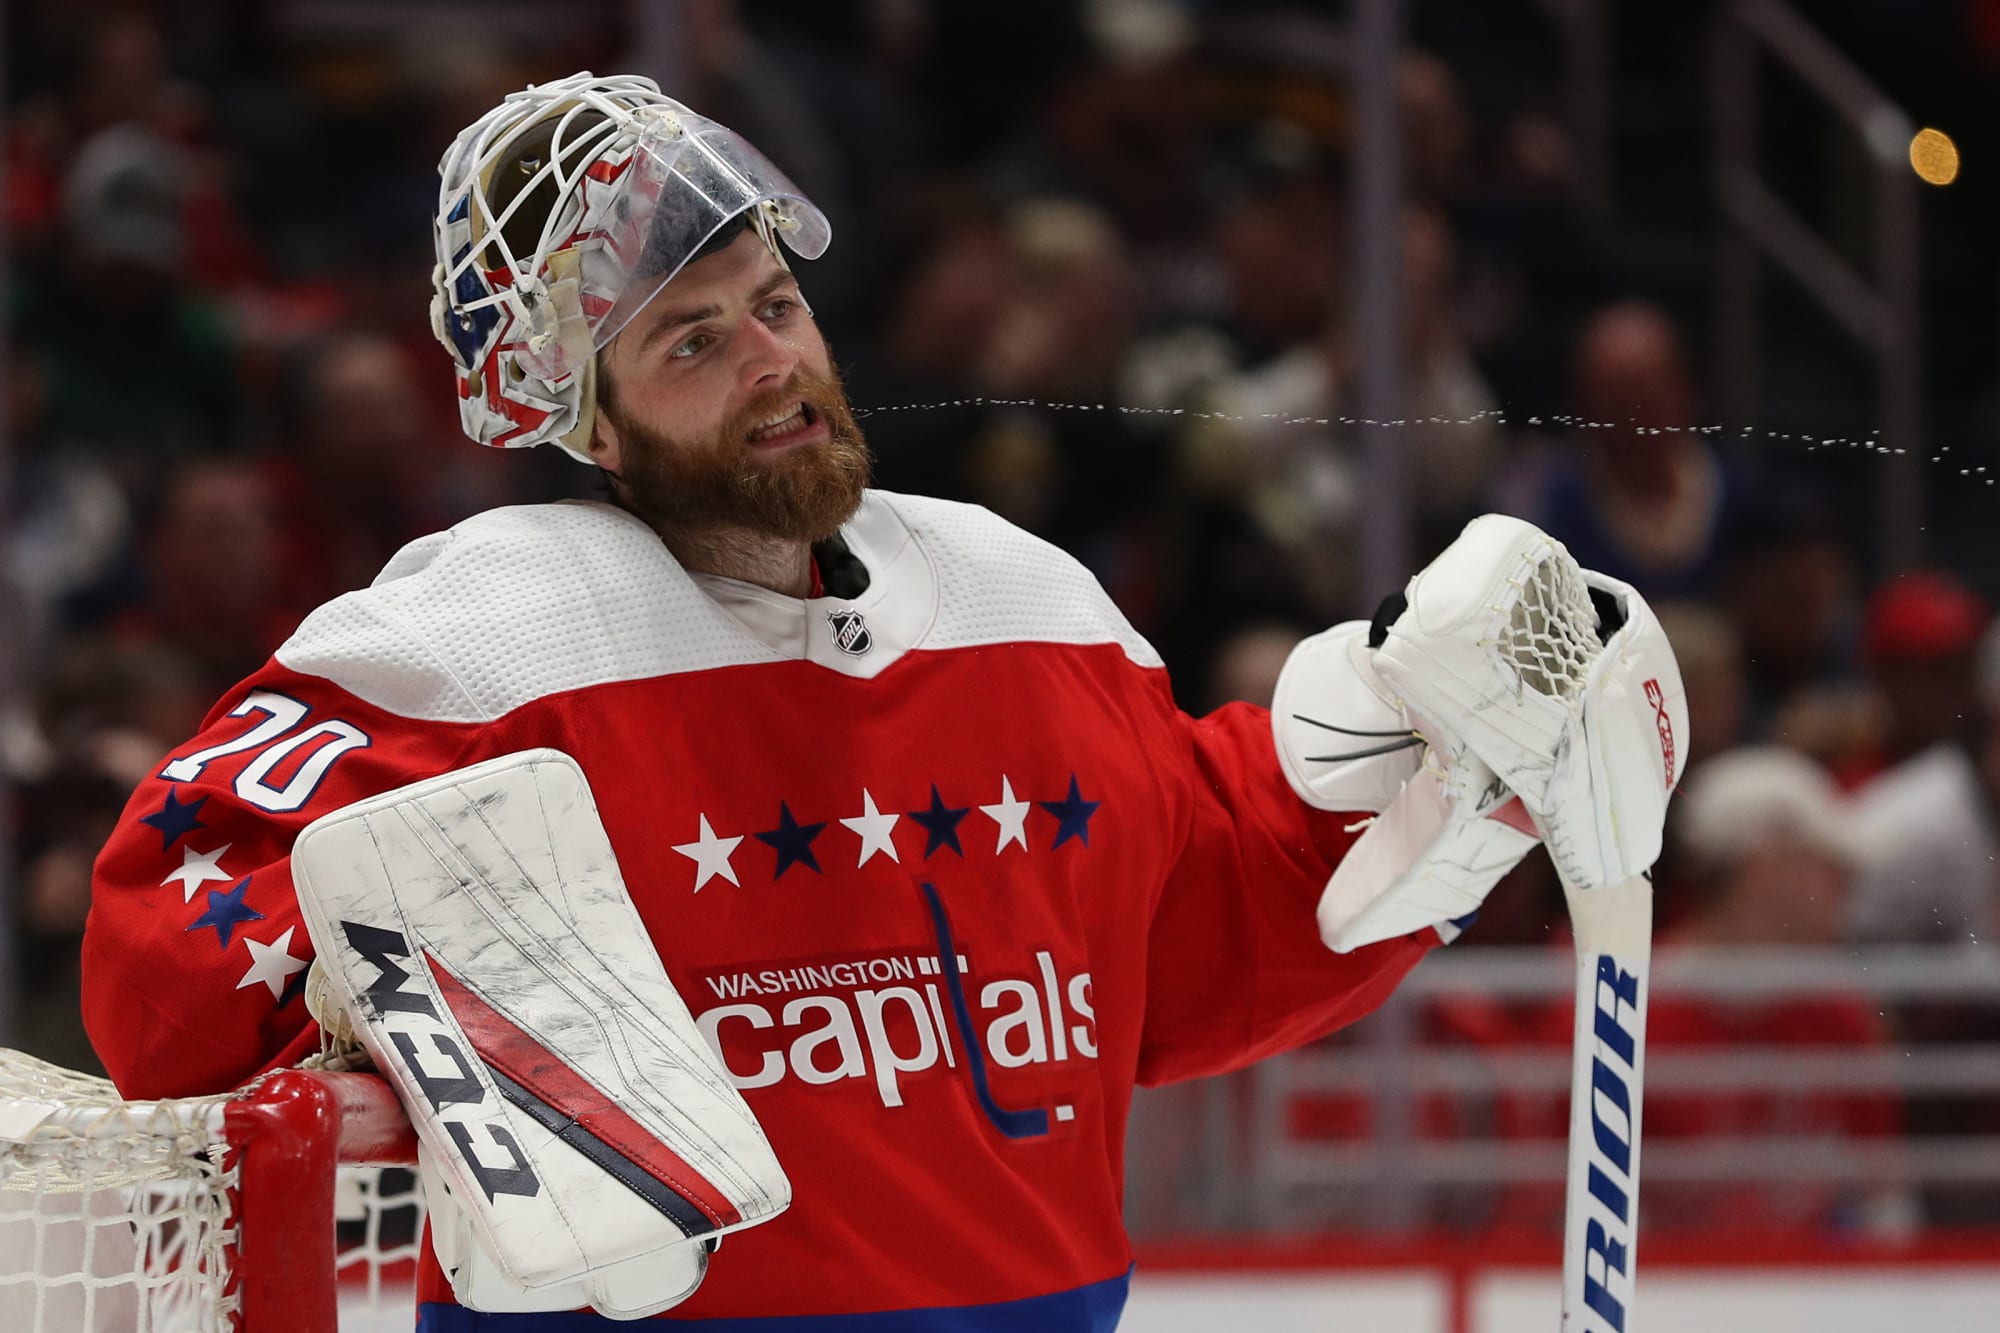 capitals jersey holtby